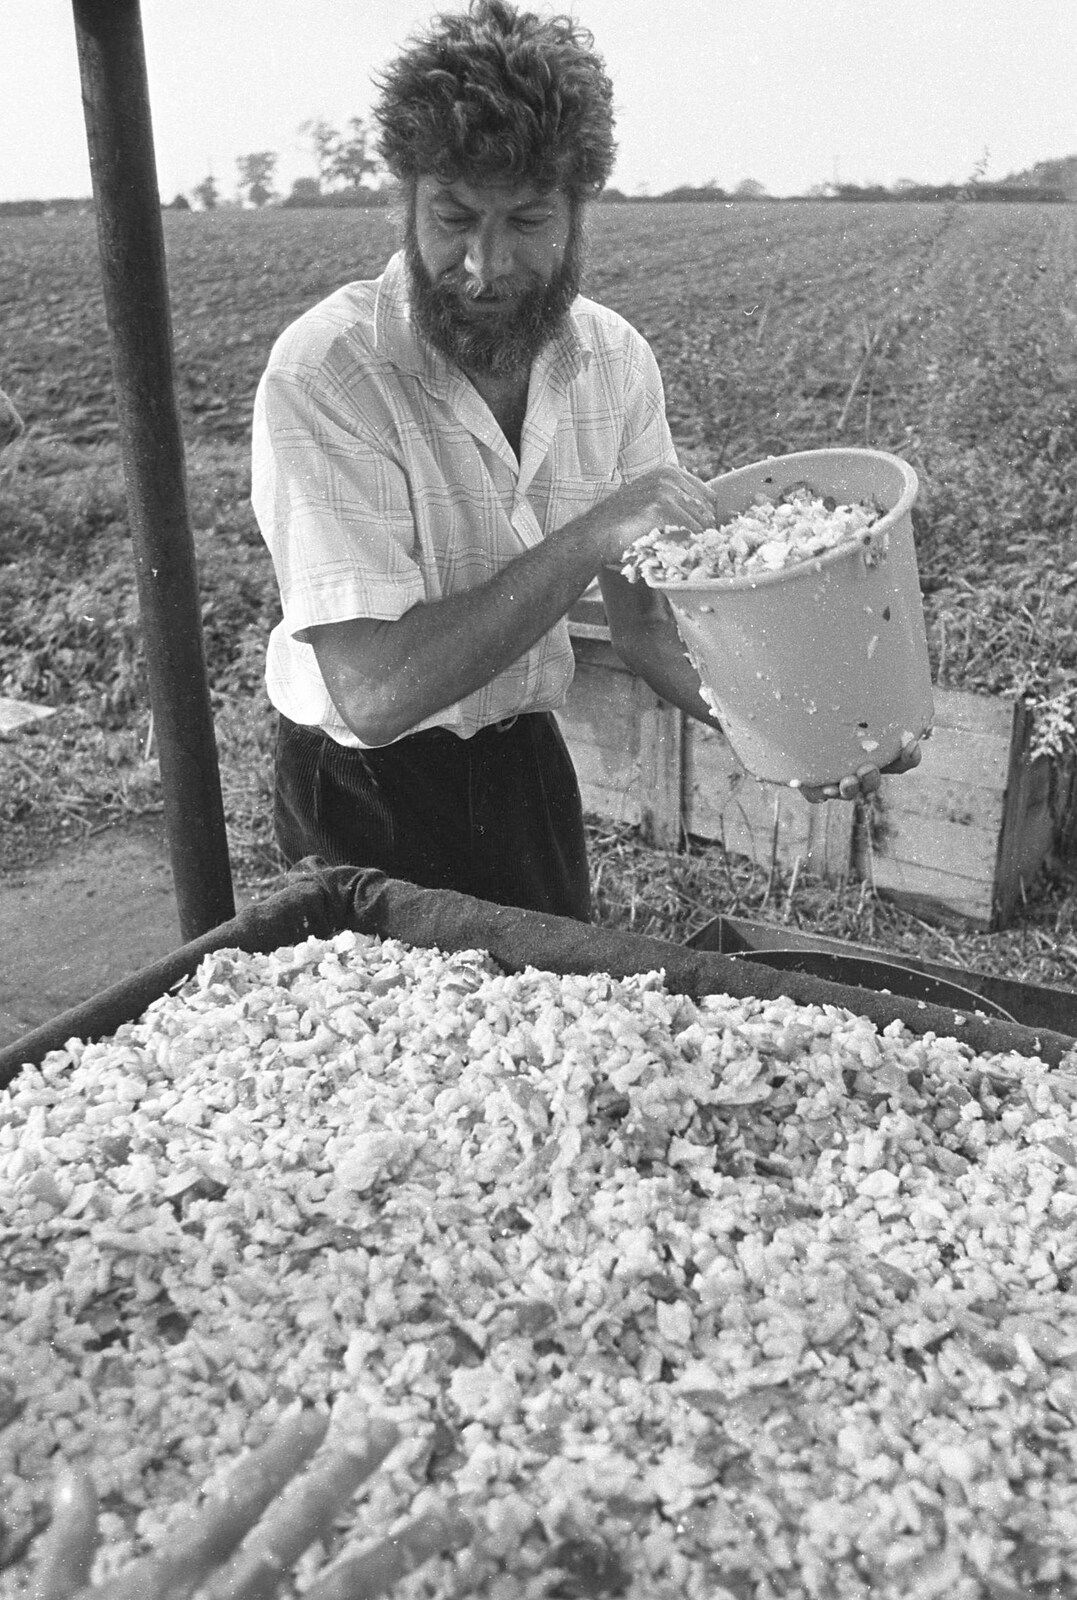 Mike Ogilsby tips on more chopped apples from Cider Making in Black and White, Stuston, Suffolk - 11th October 1992